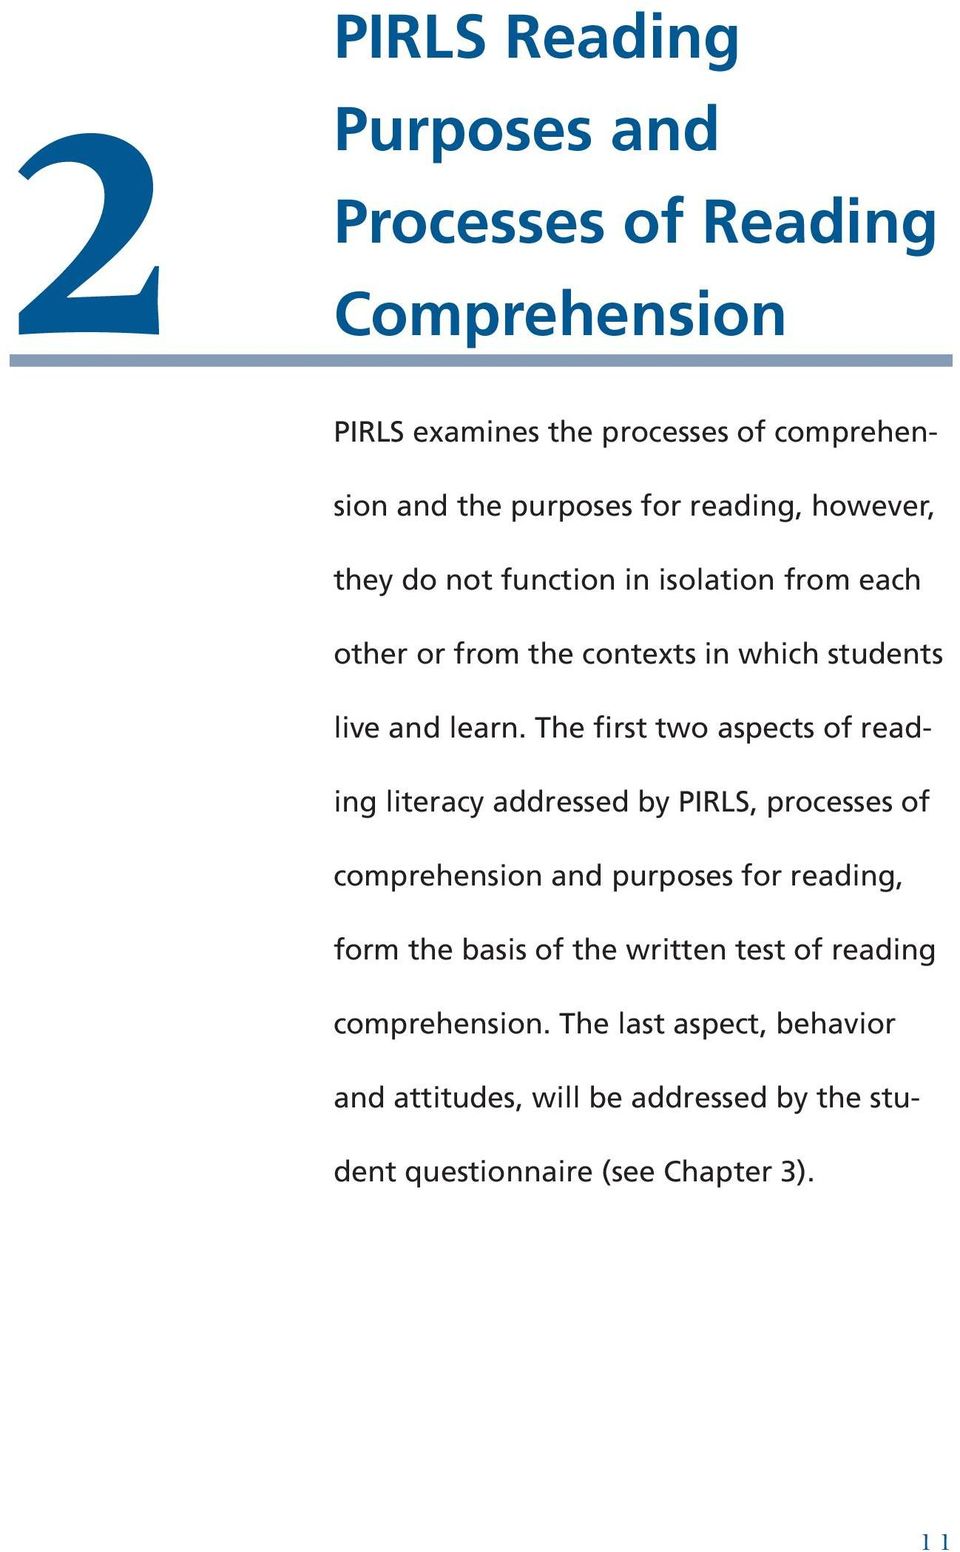 The first two aspects of reading literacy addressed by PIRLS, processes of comprehension and purposes for reading, form the basis of